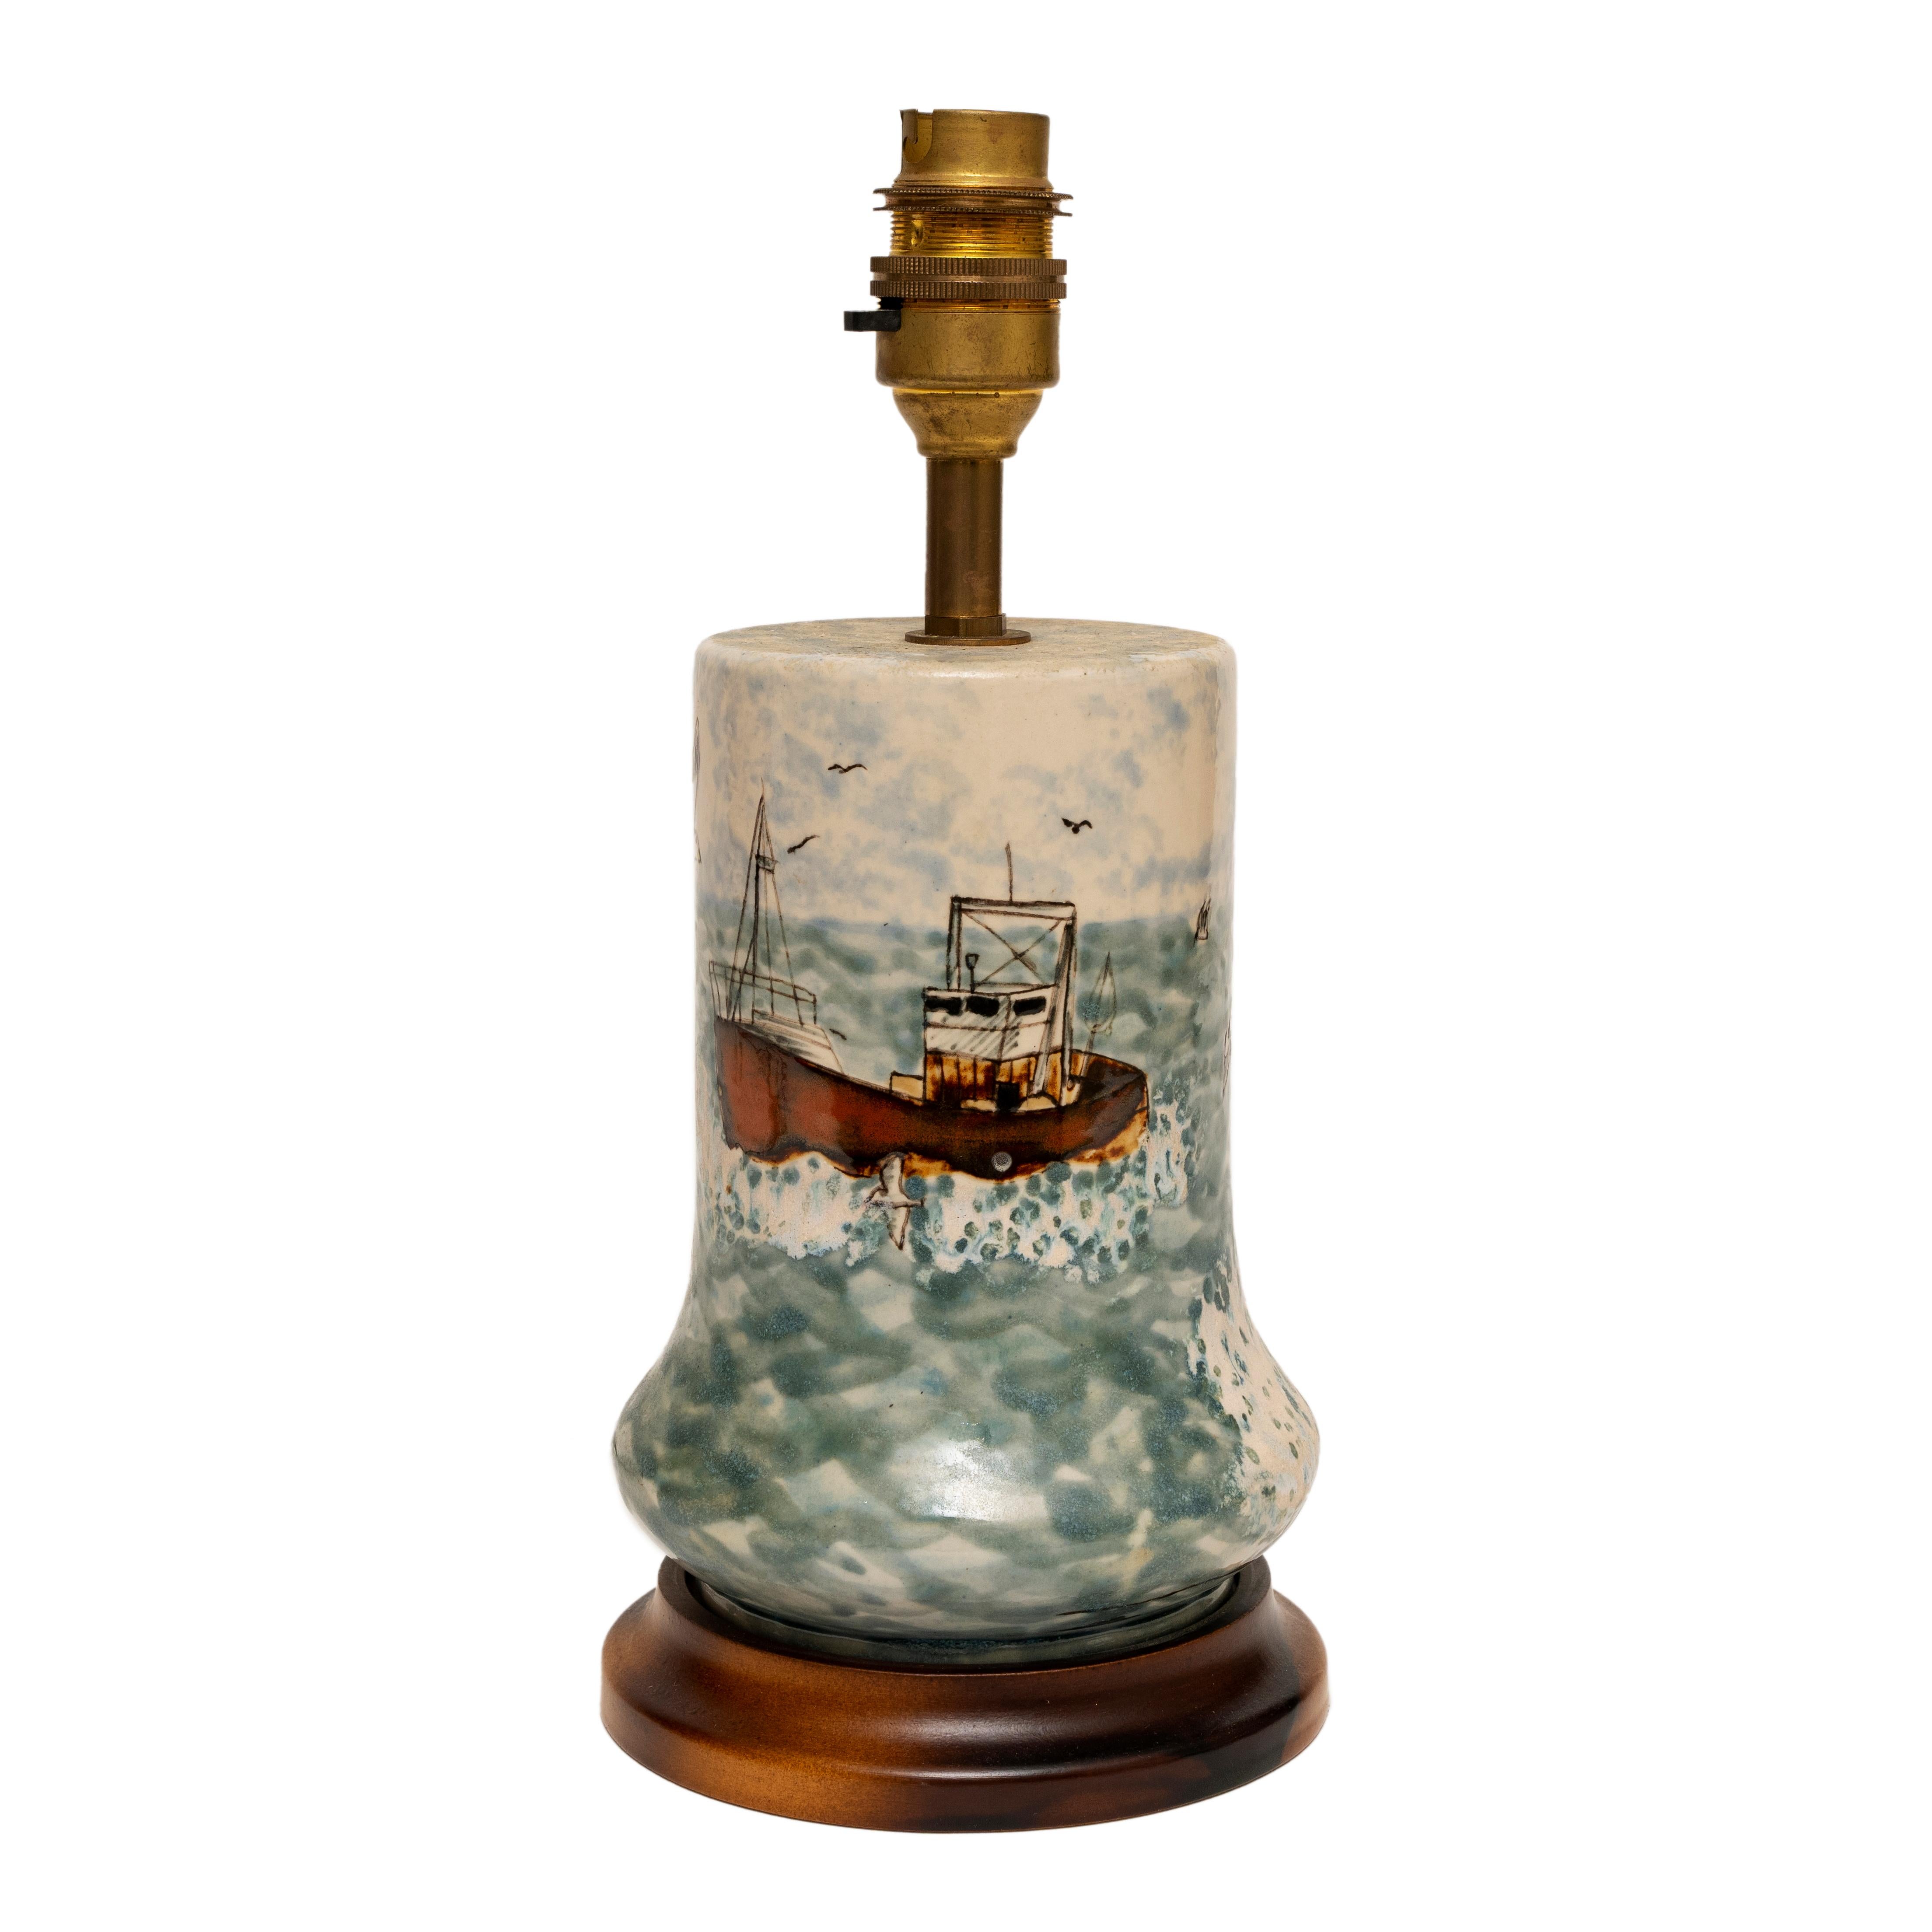 Cobridge stoneware trawler at sea, seagulls, rock table lamp, 27cm, 10¾” high
Captures the atmosphere of a trawler returning to port accompanied by seagulls 
Of interest to the maritime or seaside enthusiast or Cobridge collectors
Realistically